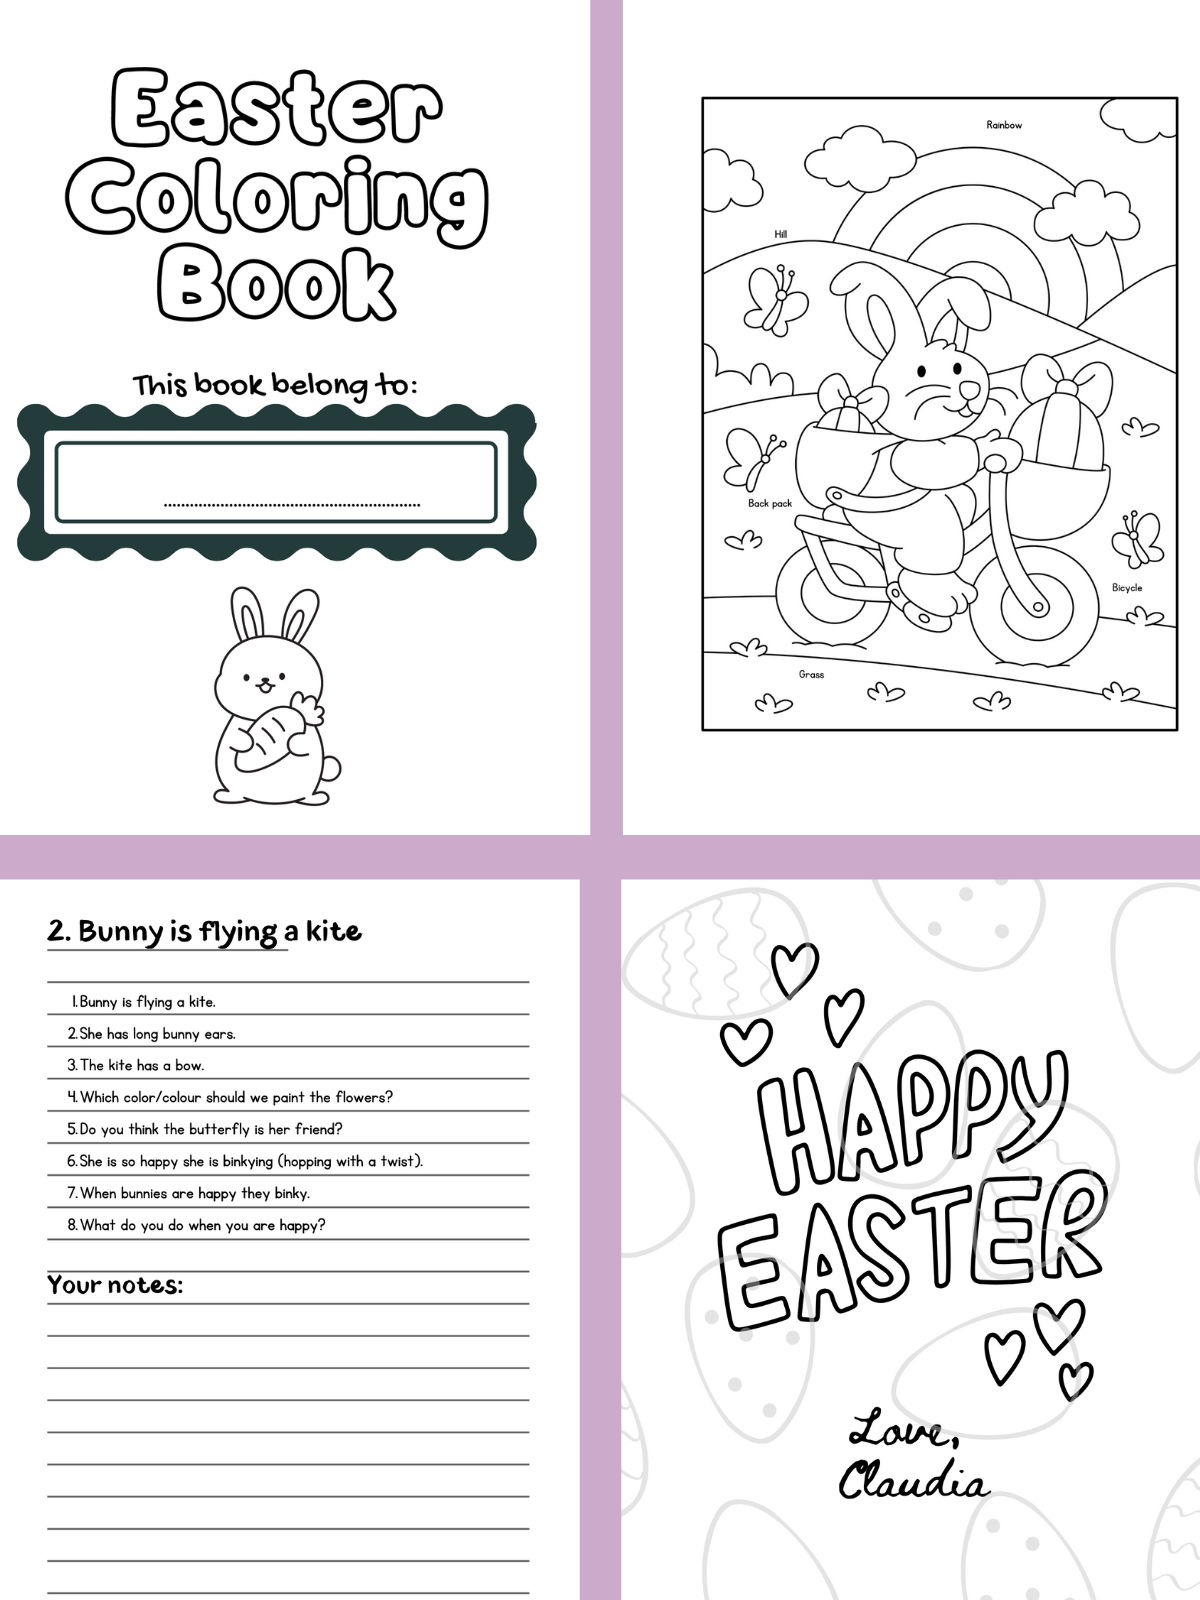 Easter coloring book and English for parents